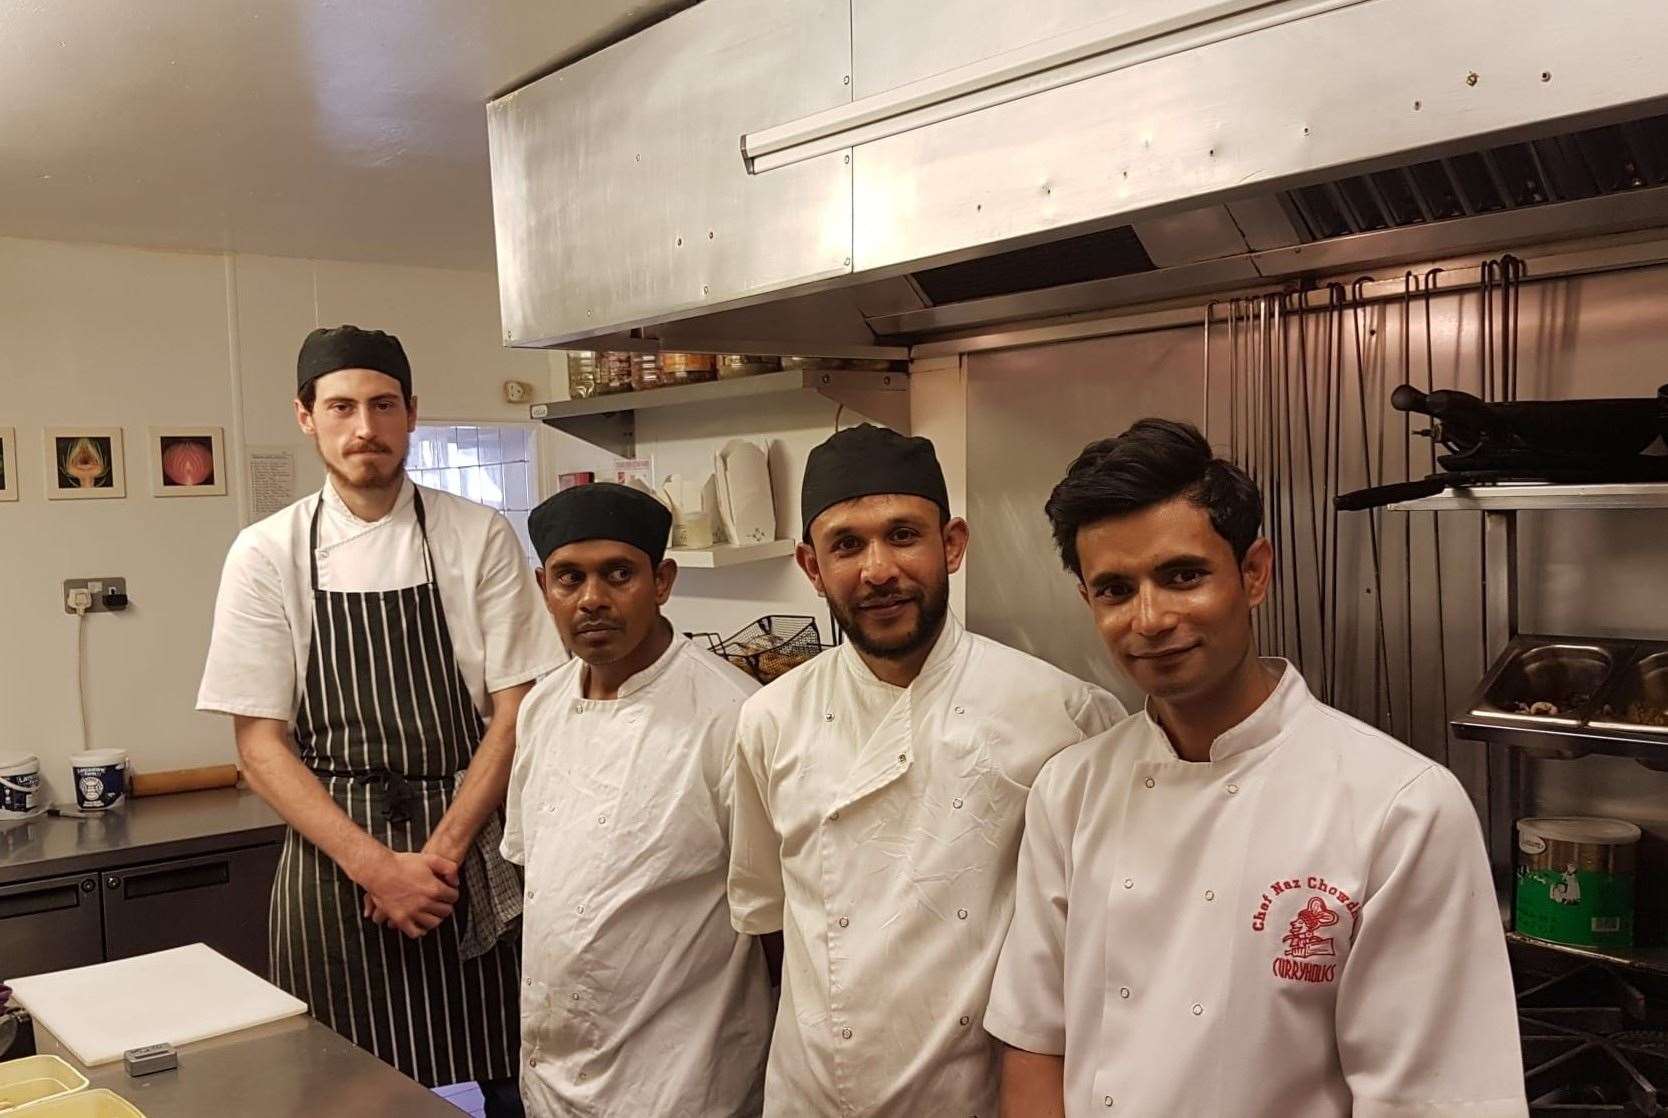 A new fine dining restaurant is set to open this month in Leysdown